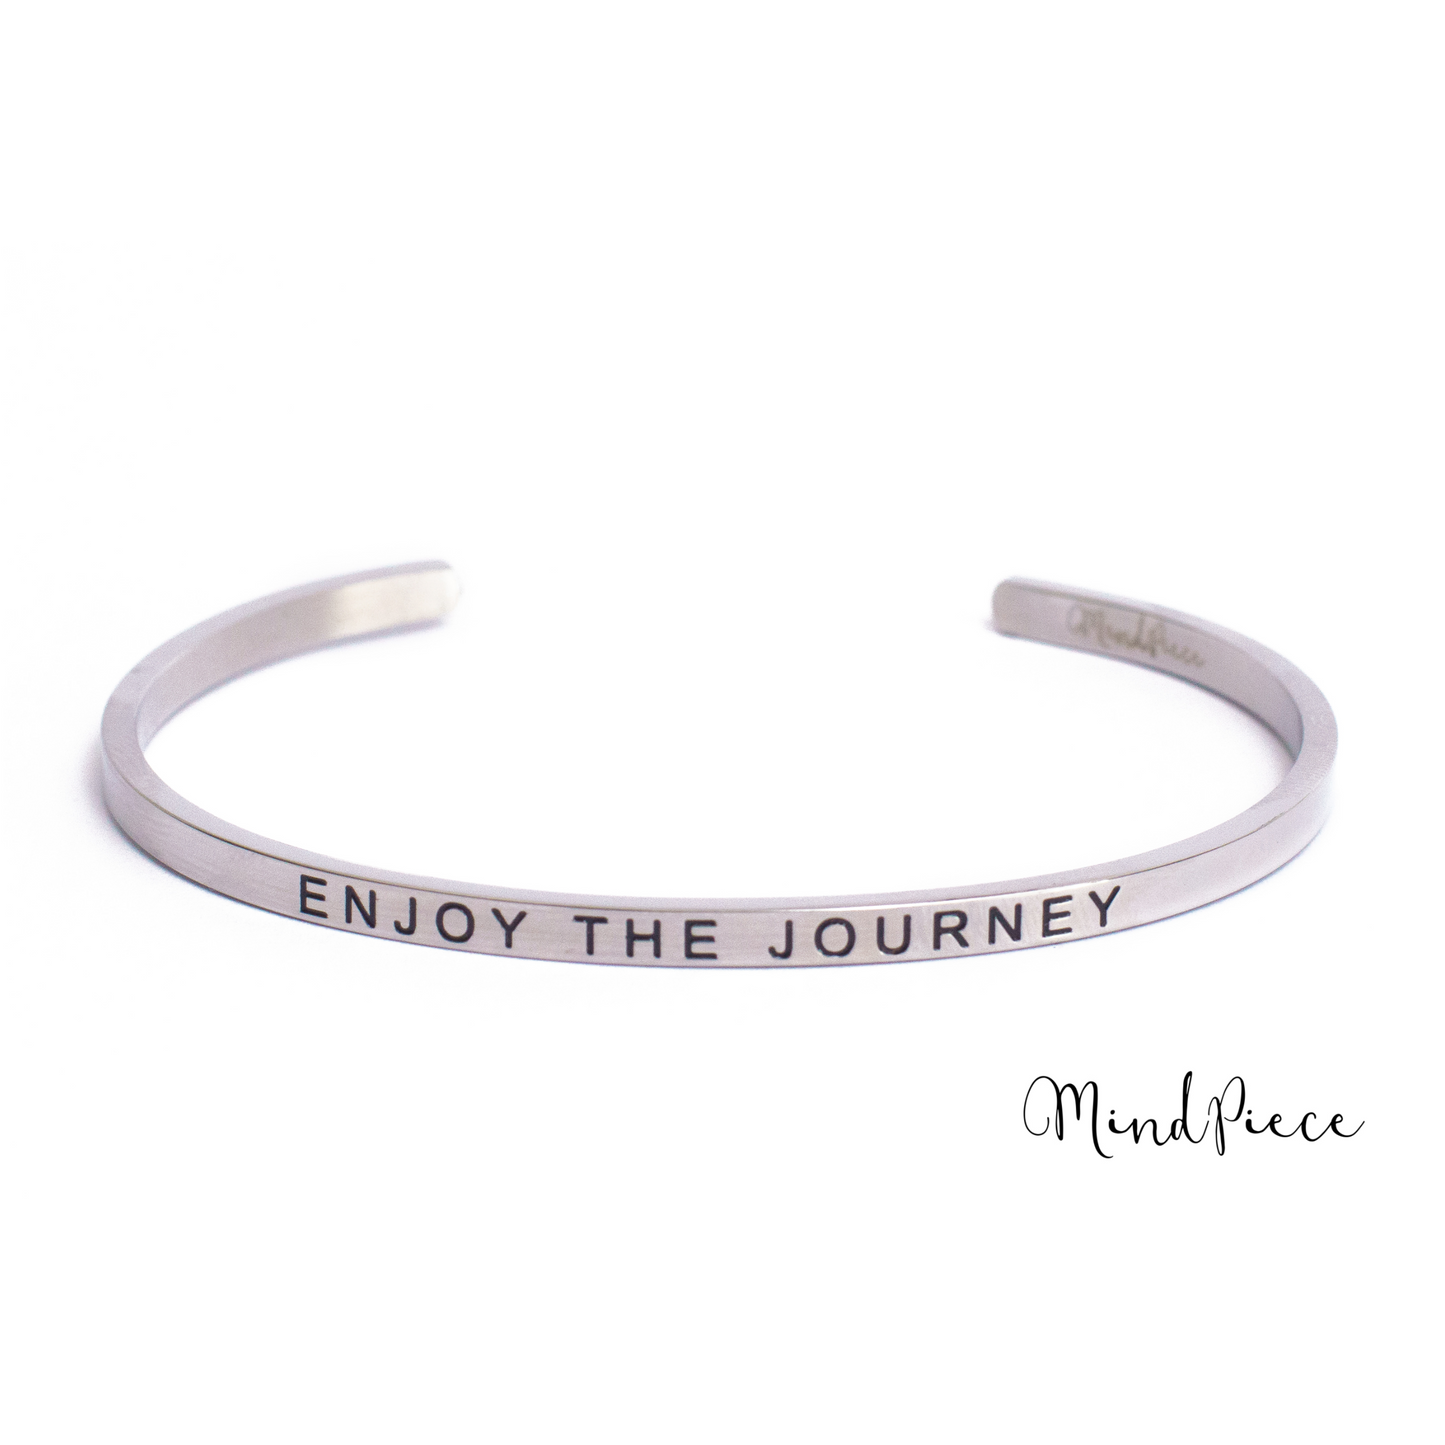 Load image into Gallery viewer, Quote Bracelet - Enjoy the journey (1 pcs)
